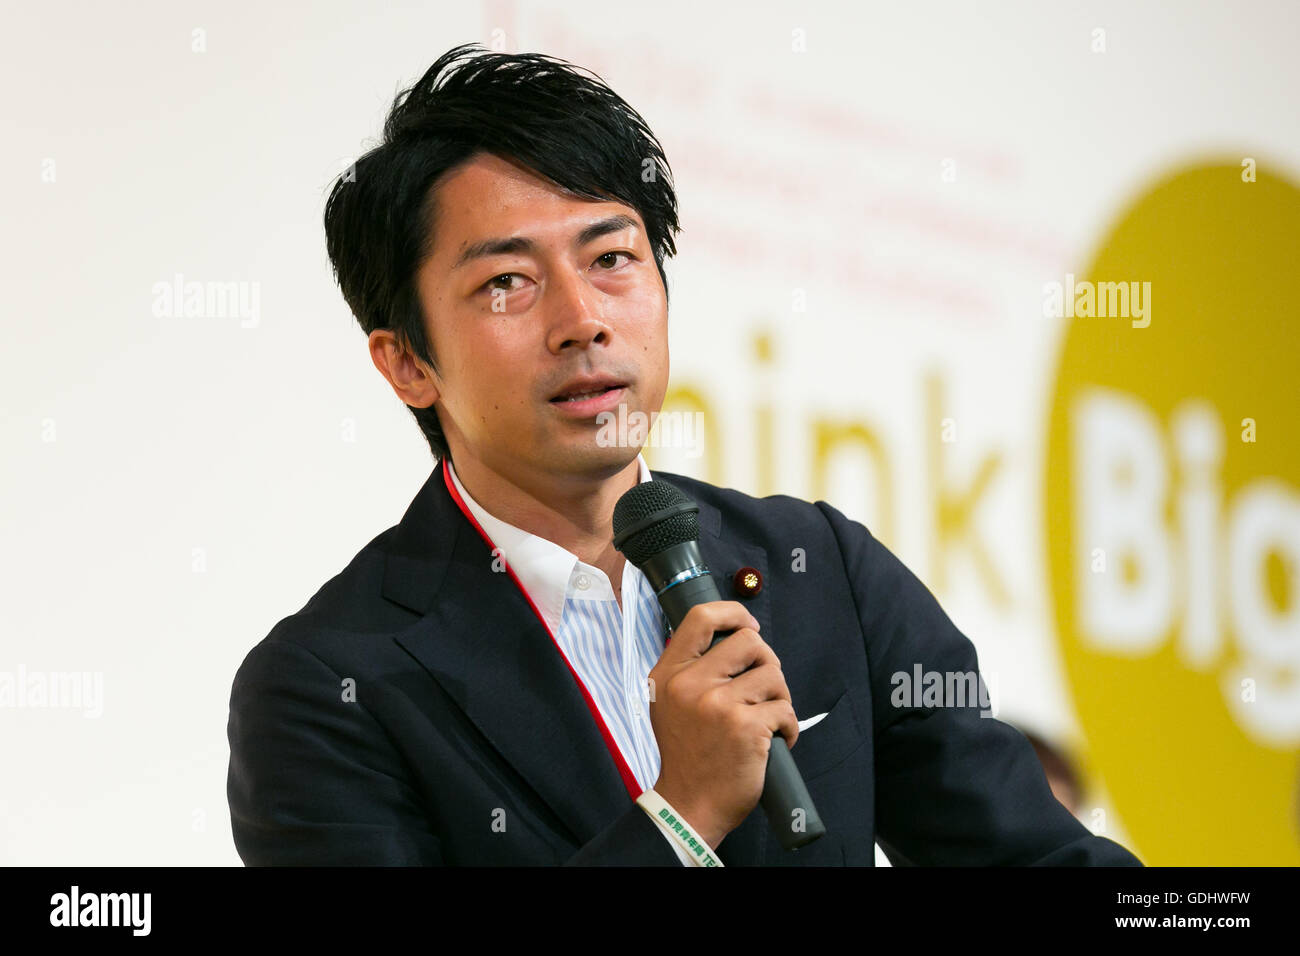 Japanese politician Shinjiro Koizumi speaks during the 21st International Conference for Women in Business at Grand Nikko Tokyo Daiba on July 18, 2016, Tokyo, Japan. 55 guest speakers, principally female leaders, gathered to discuss the roles of women in politics, business and society. © Rodrigo Reyes Marin/AFLO/Alamy Live News Stock Photo